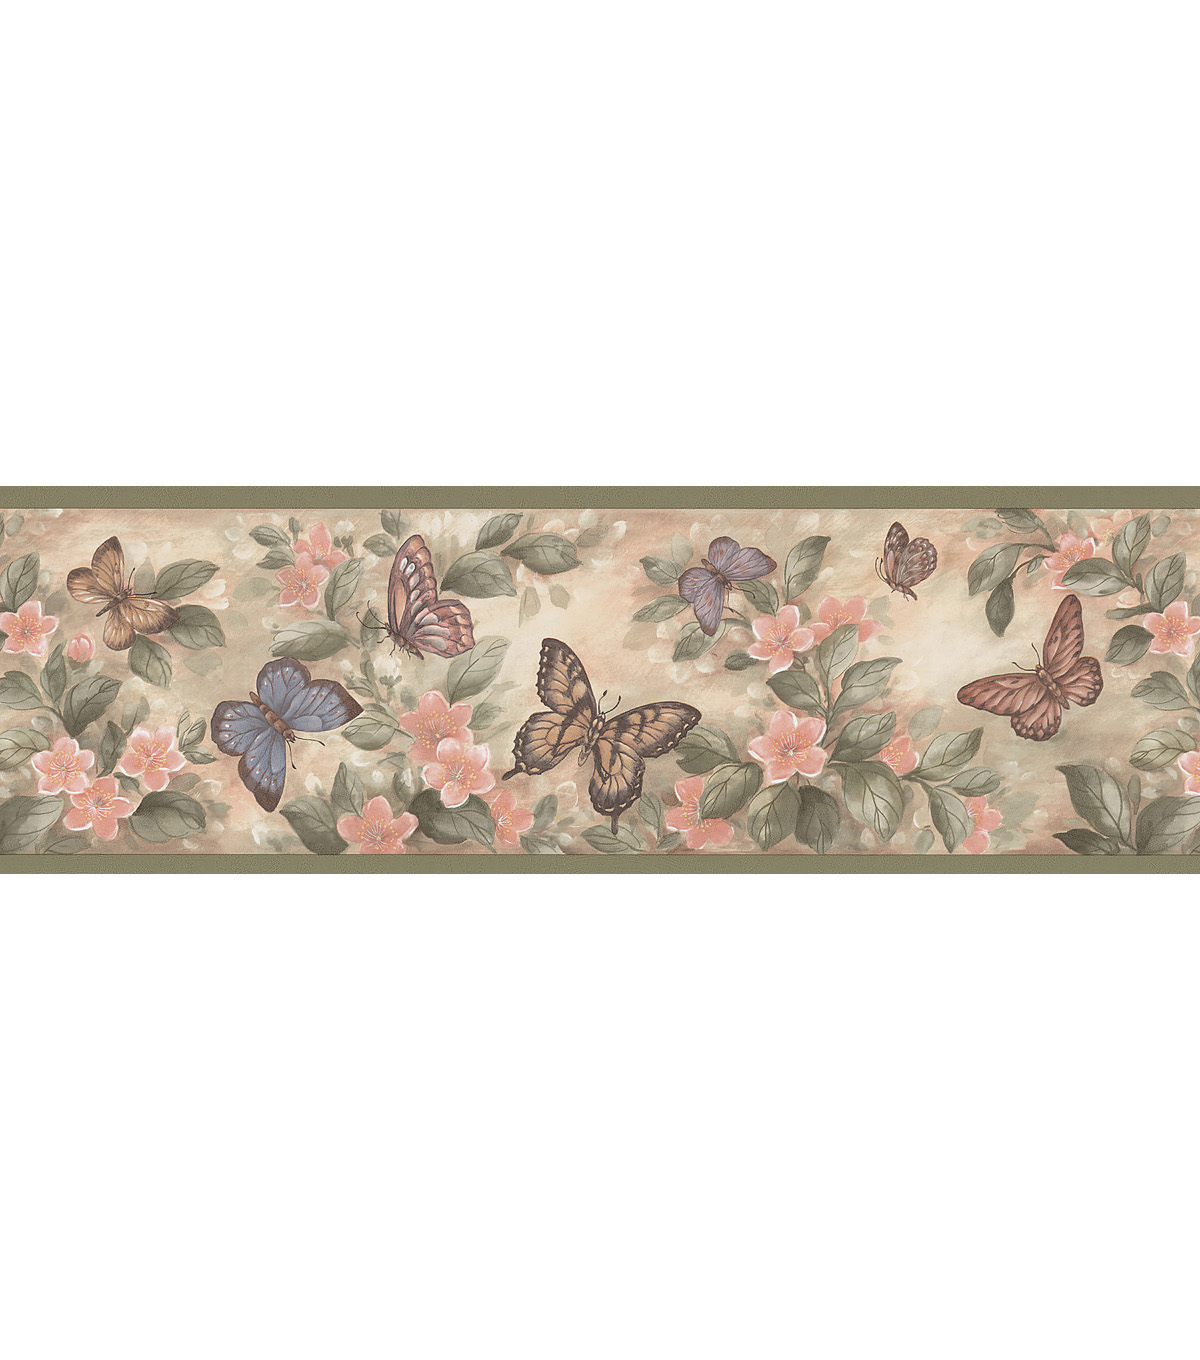 Butterfly Floral Wallpaper Border Multicolor SampleButterfly Floral